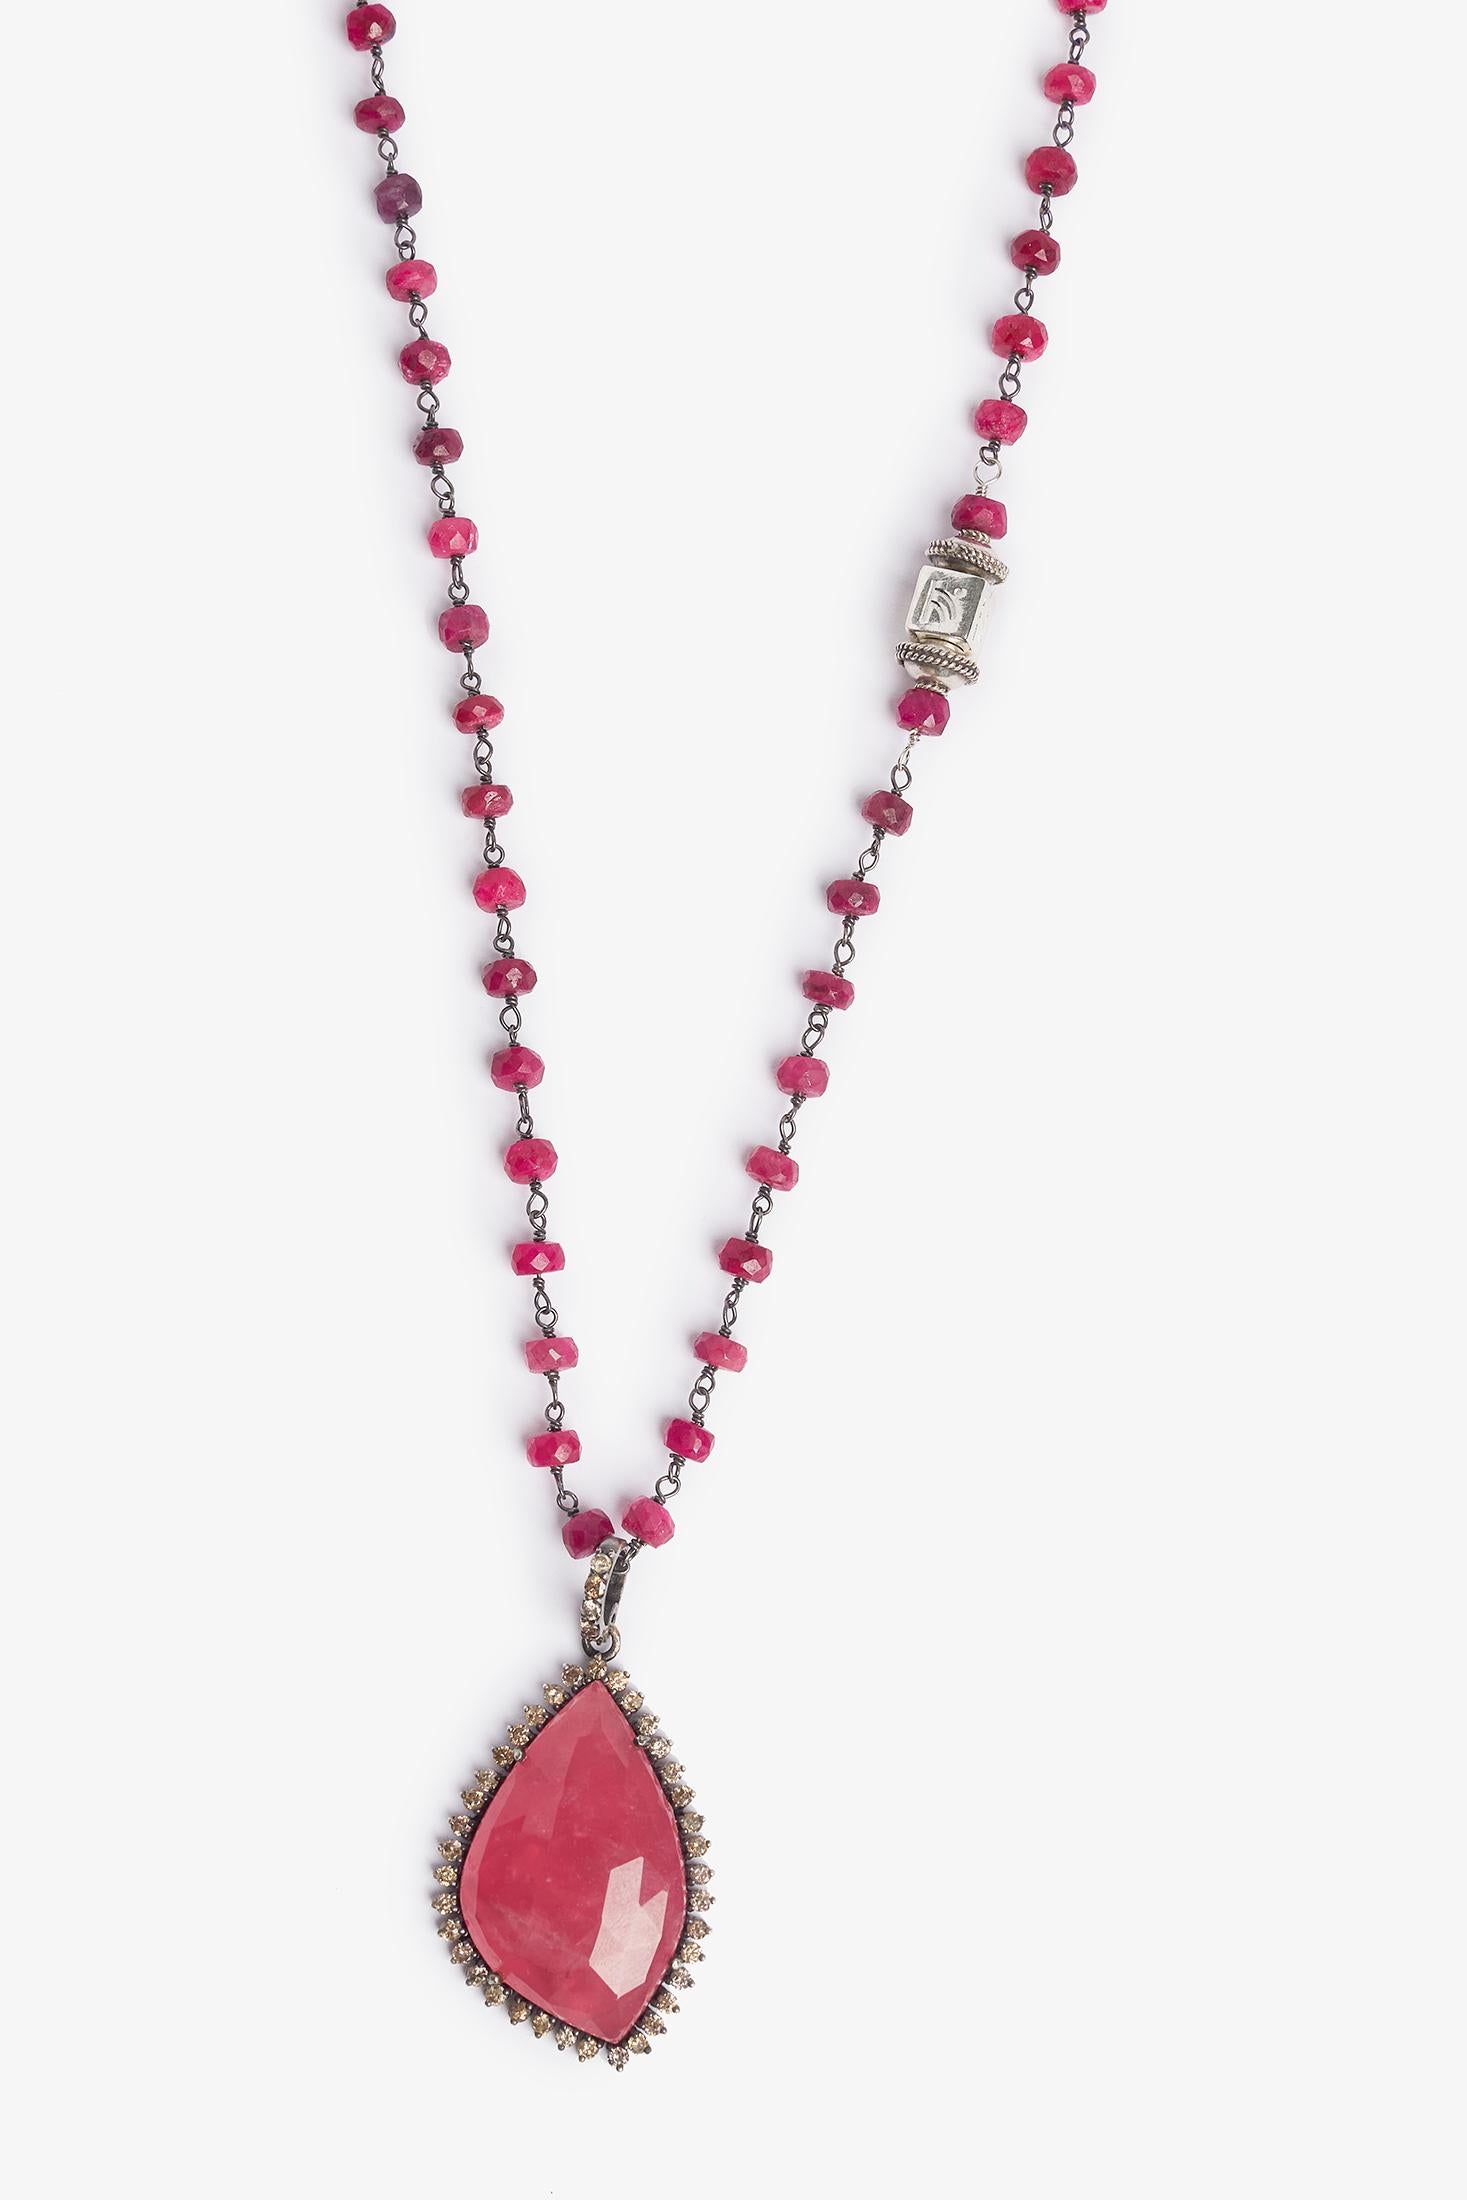 Story Behind the Jewelry
Ruby sterling silver chain accented with a rhodochrosite pave diamond pendant.  Rhodochrosite is the beautiful stone in the pave diamond pendant.  It is a stone that represents love and compassion.  The chain is adorned with